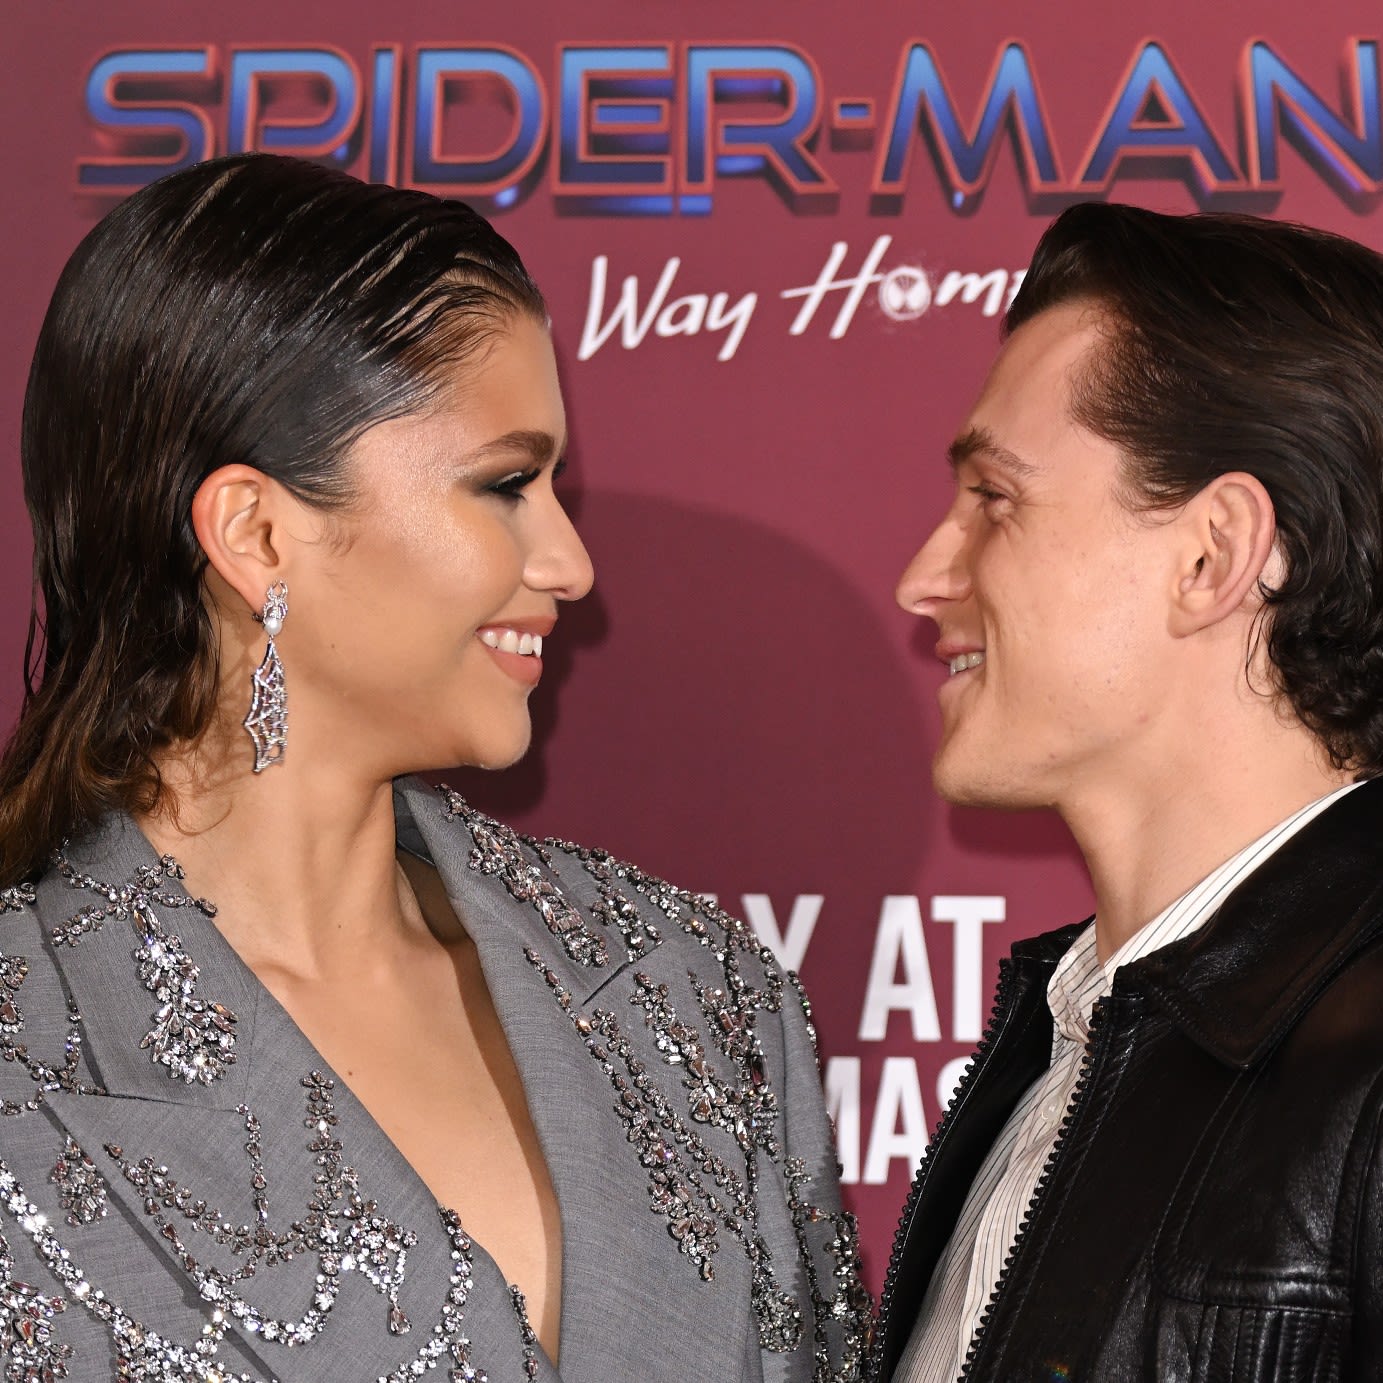 Three Years In, Zendaya and Tom Holland Are “Rock Solid” and the “Real Deal”